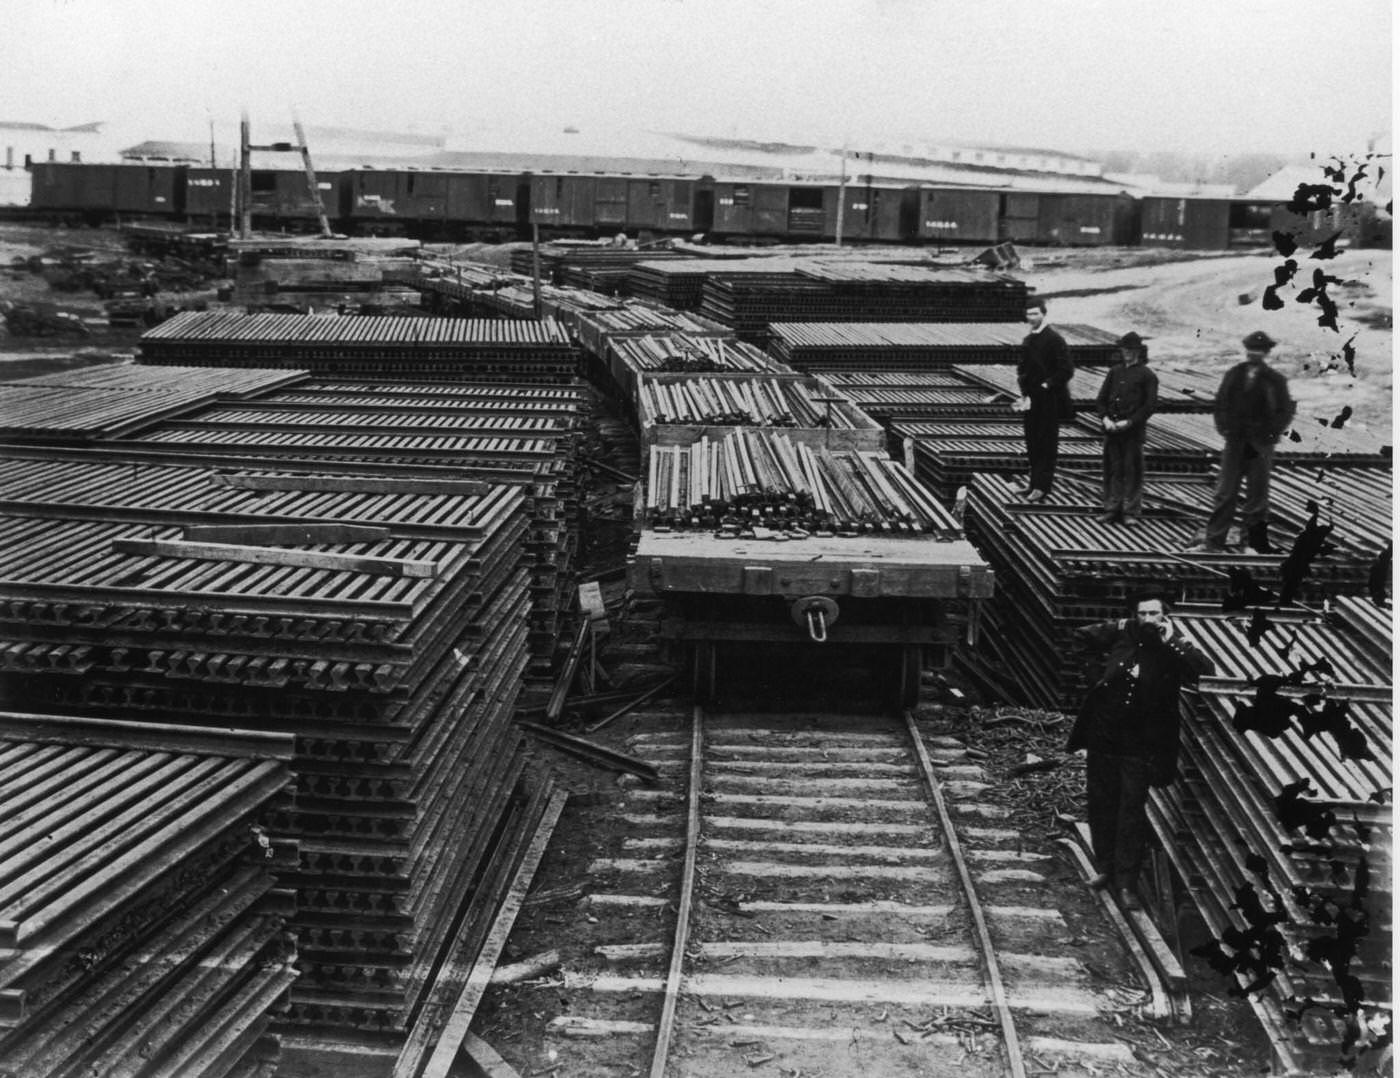 A US Military Rail Road (USMRR) yard full of rails to maintain Federal rail lines during the American Civil War, at Alexandria, Virginia, 1860